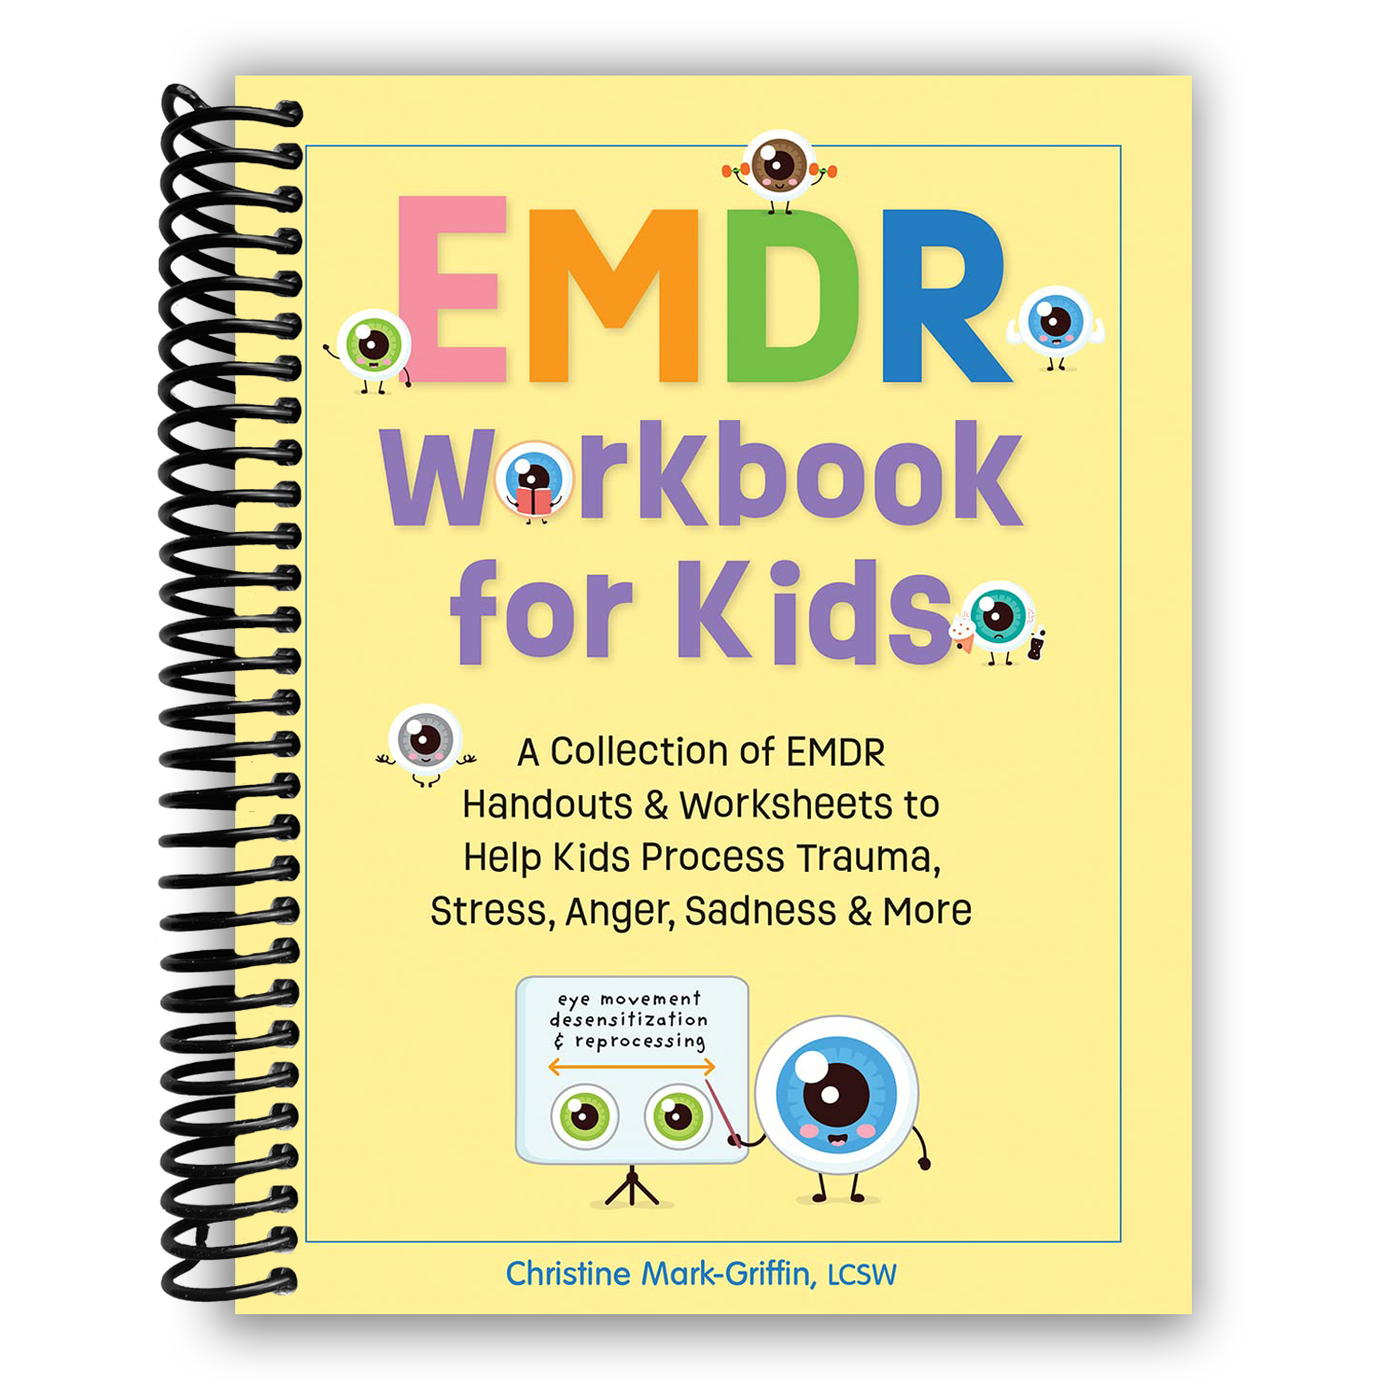 EMDR Workbook for Kids: A Collection of EMDR Handouts & Worksheets to Help Kids Process Trauma, Stress, Anger, Sadness & More